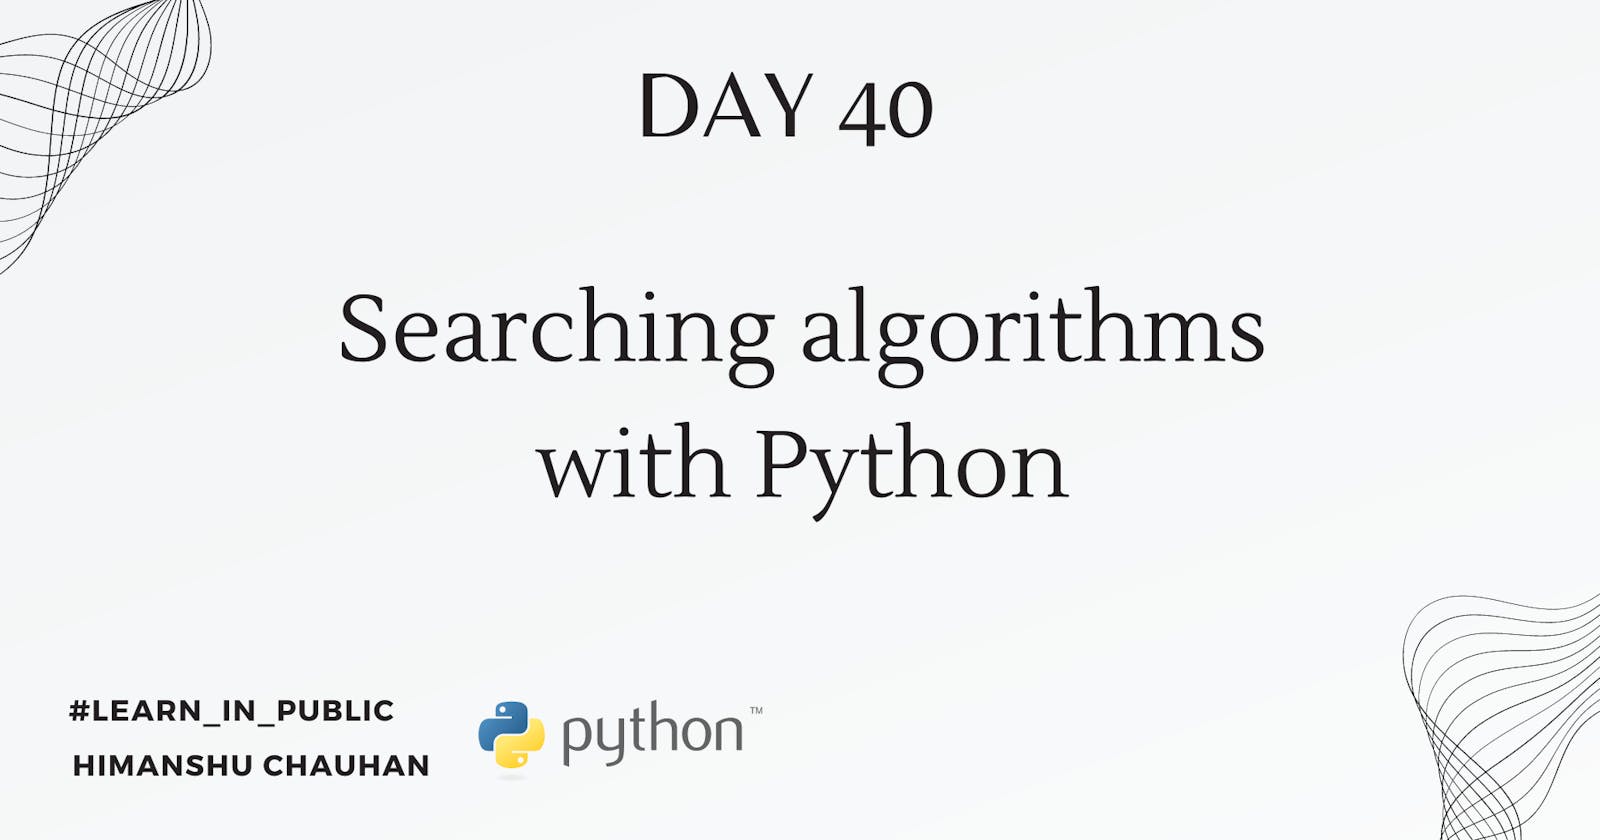 Day 40: Searching algorithms with Python